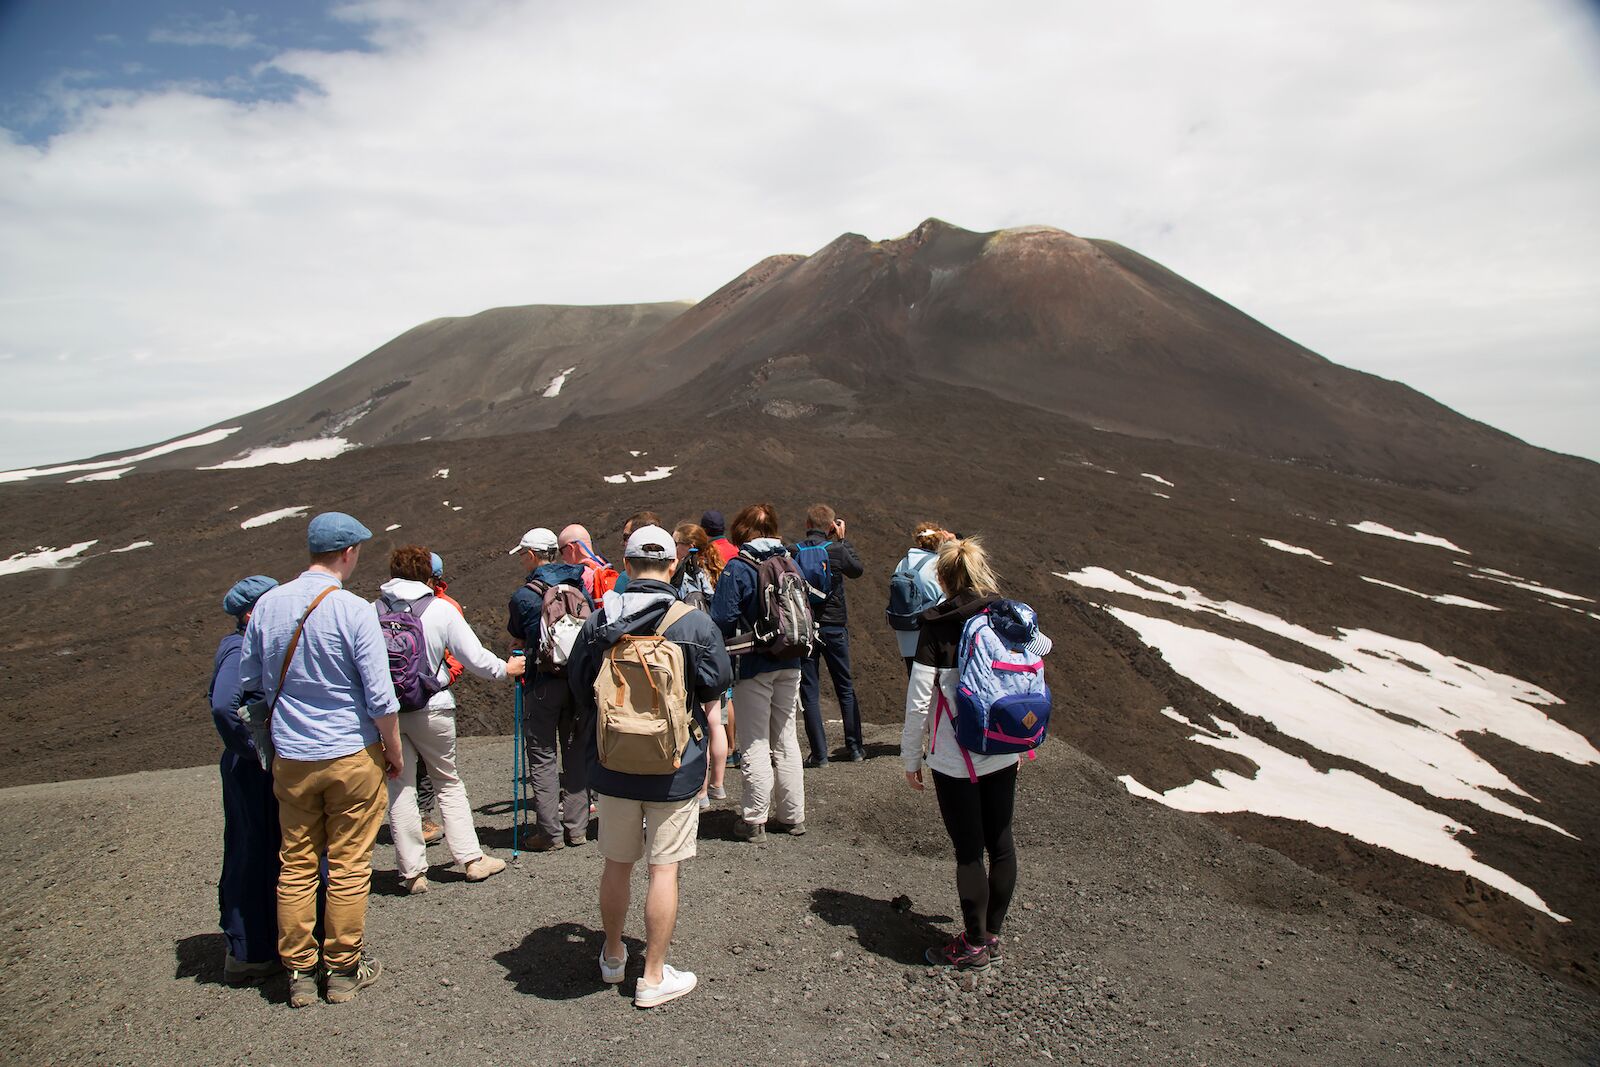 Crowds on Mount Etna in Sicily, part of a cruise shore excursion